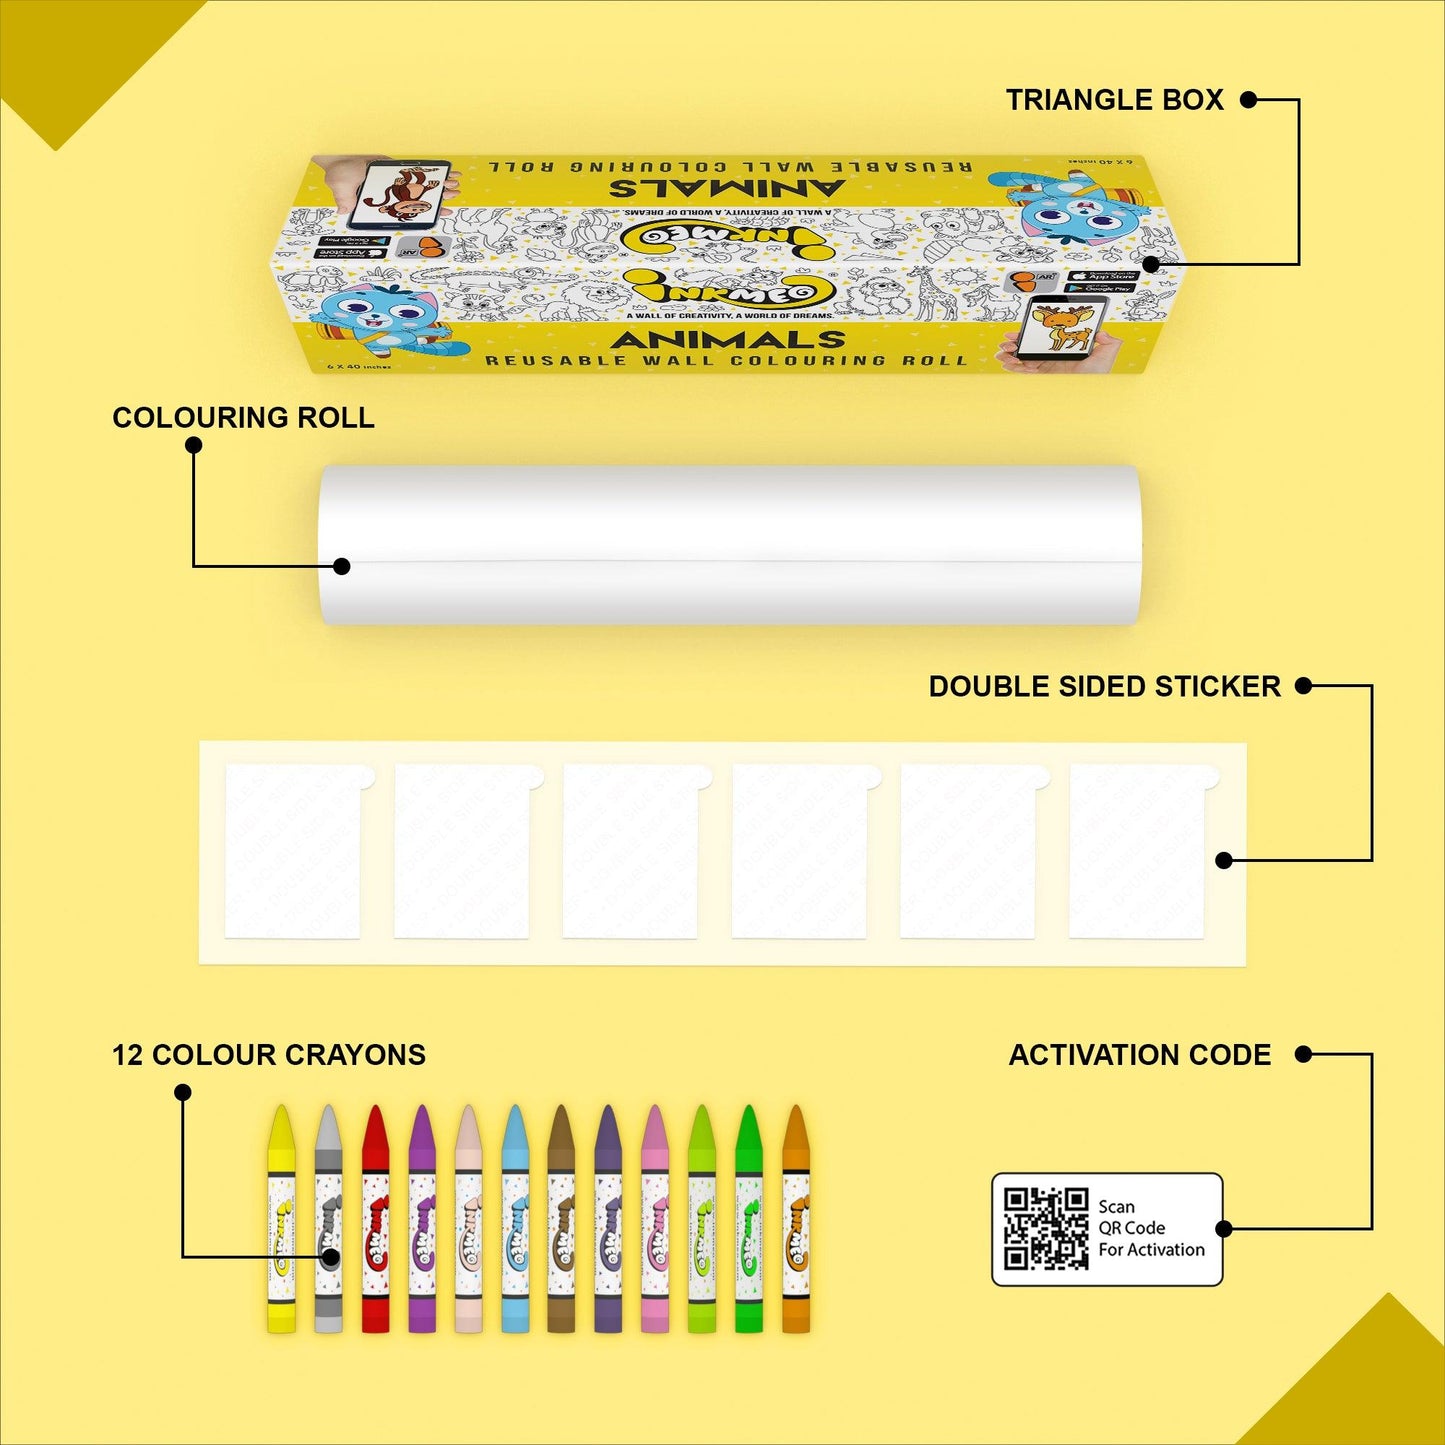 The image depicts a yellow background with a single triangular box, a coloring roll, 6 double-sided stickers, 12 colored crayons, and an activation code.